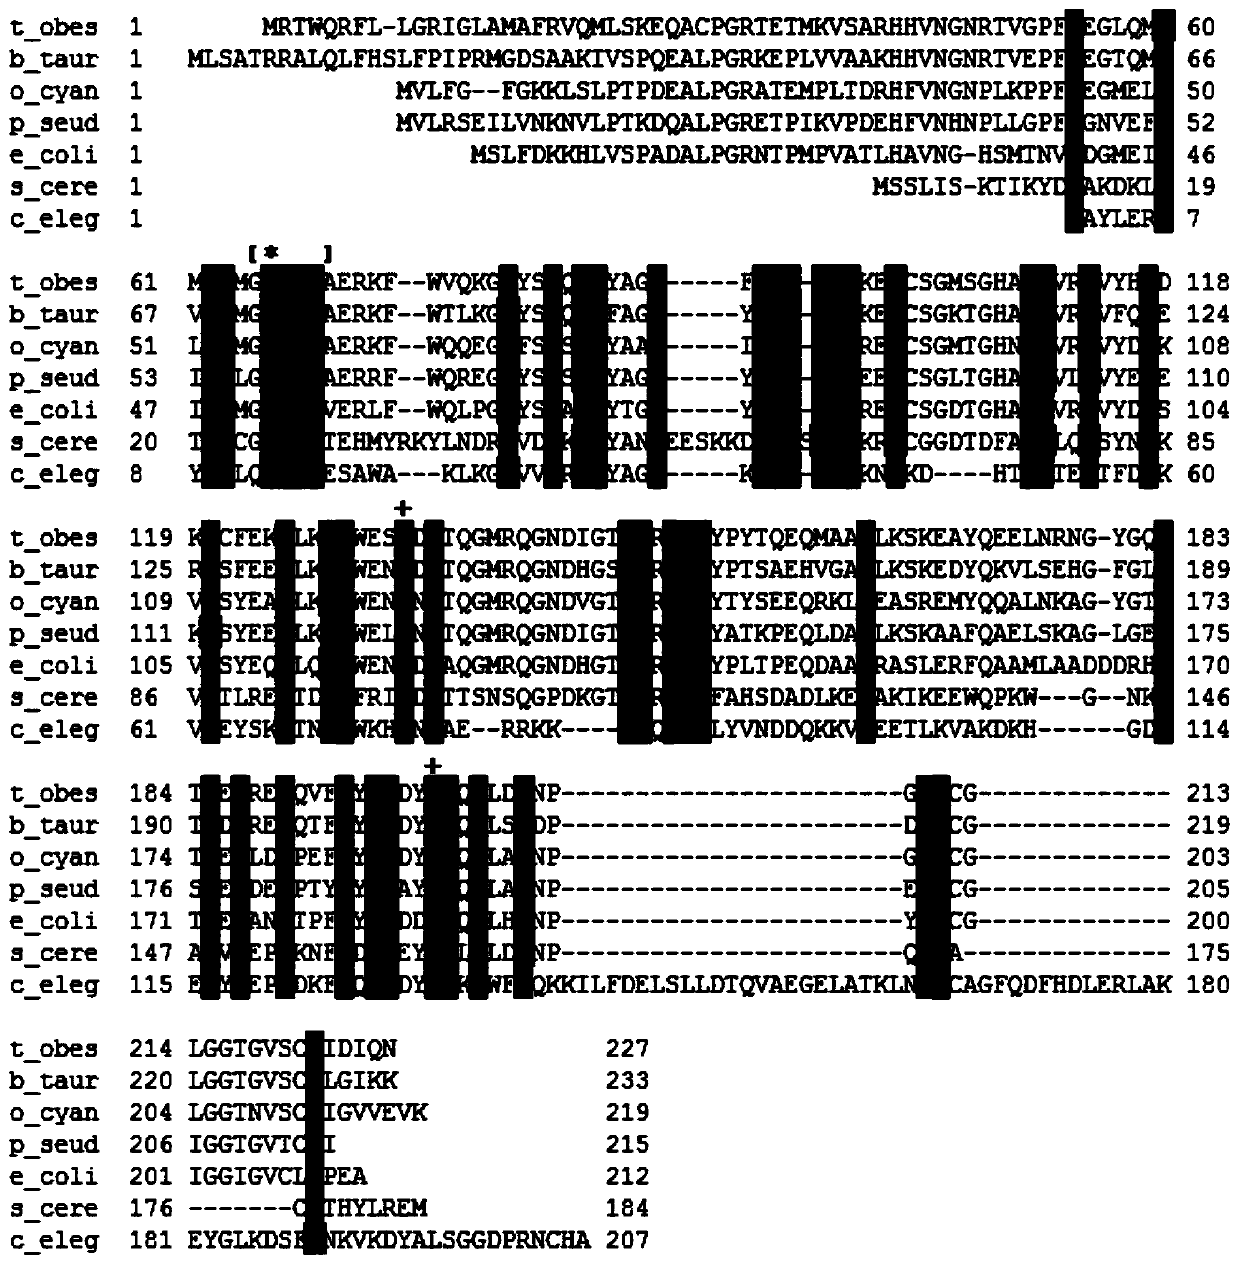 MsrA gene and protein of white tip shark as well as method for extracting gene